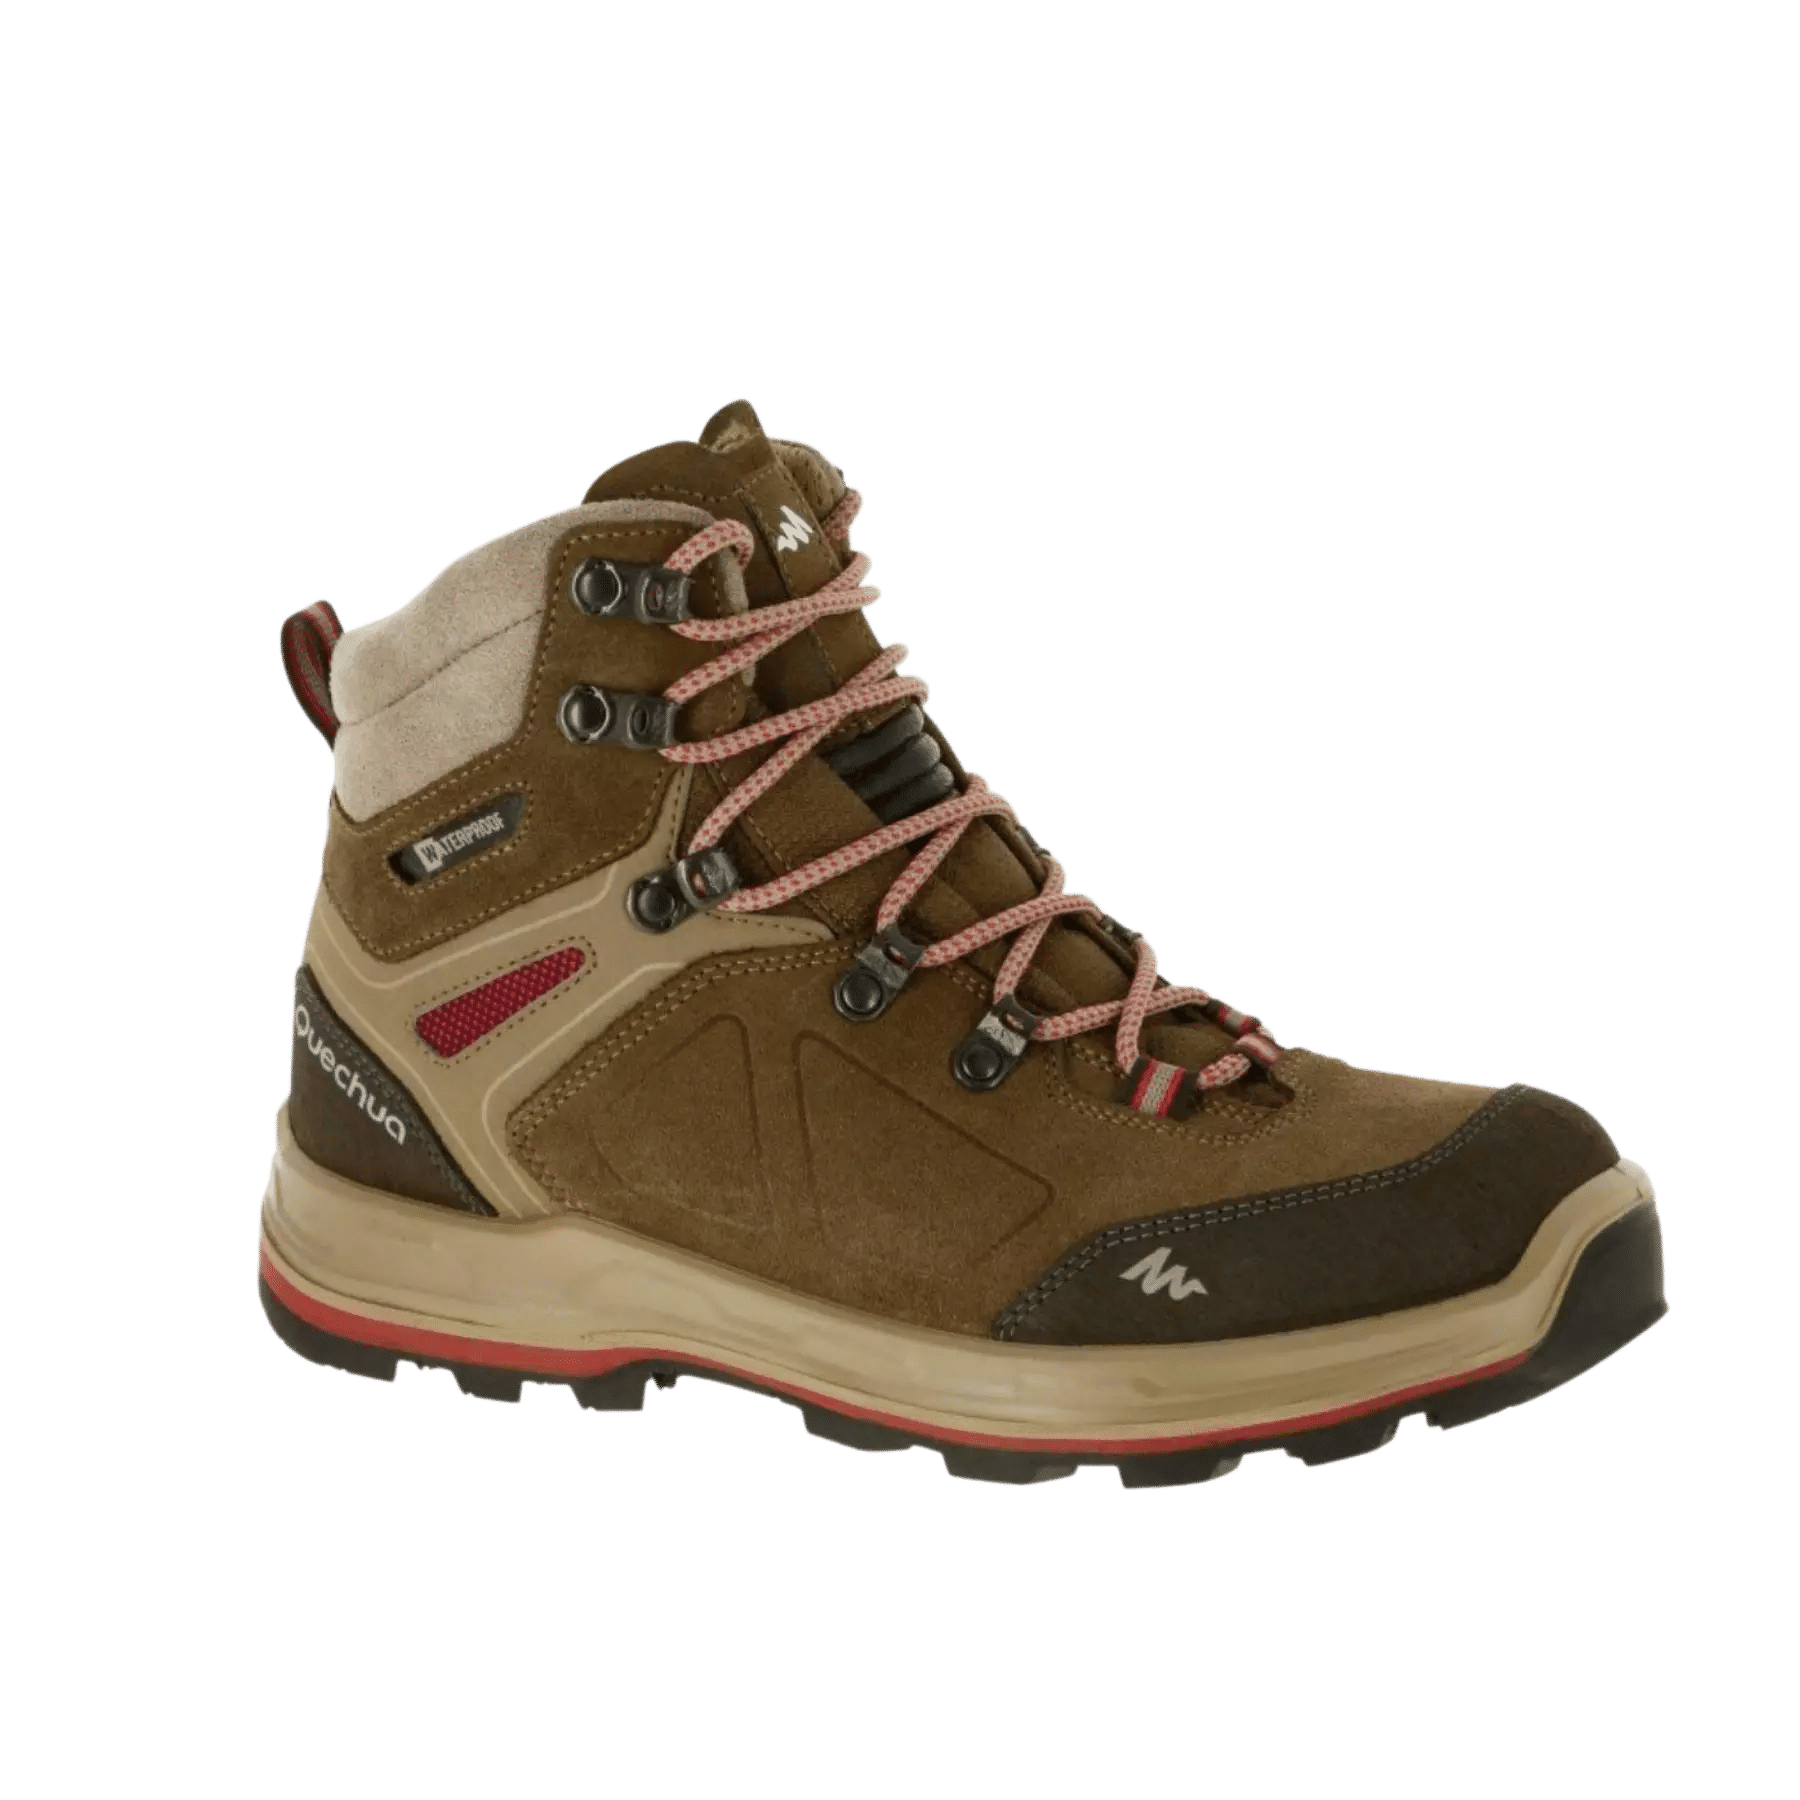 These are product images of Trek 100 Trekking Shoes on rent - Women's by SharePal.